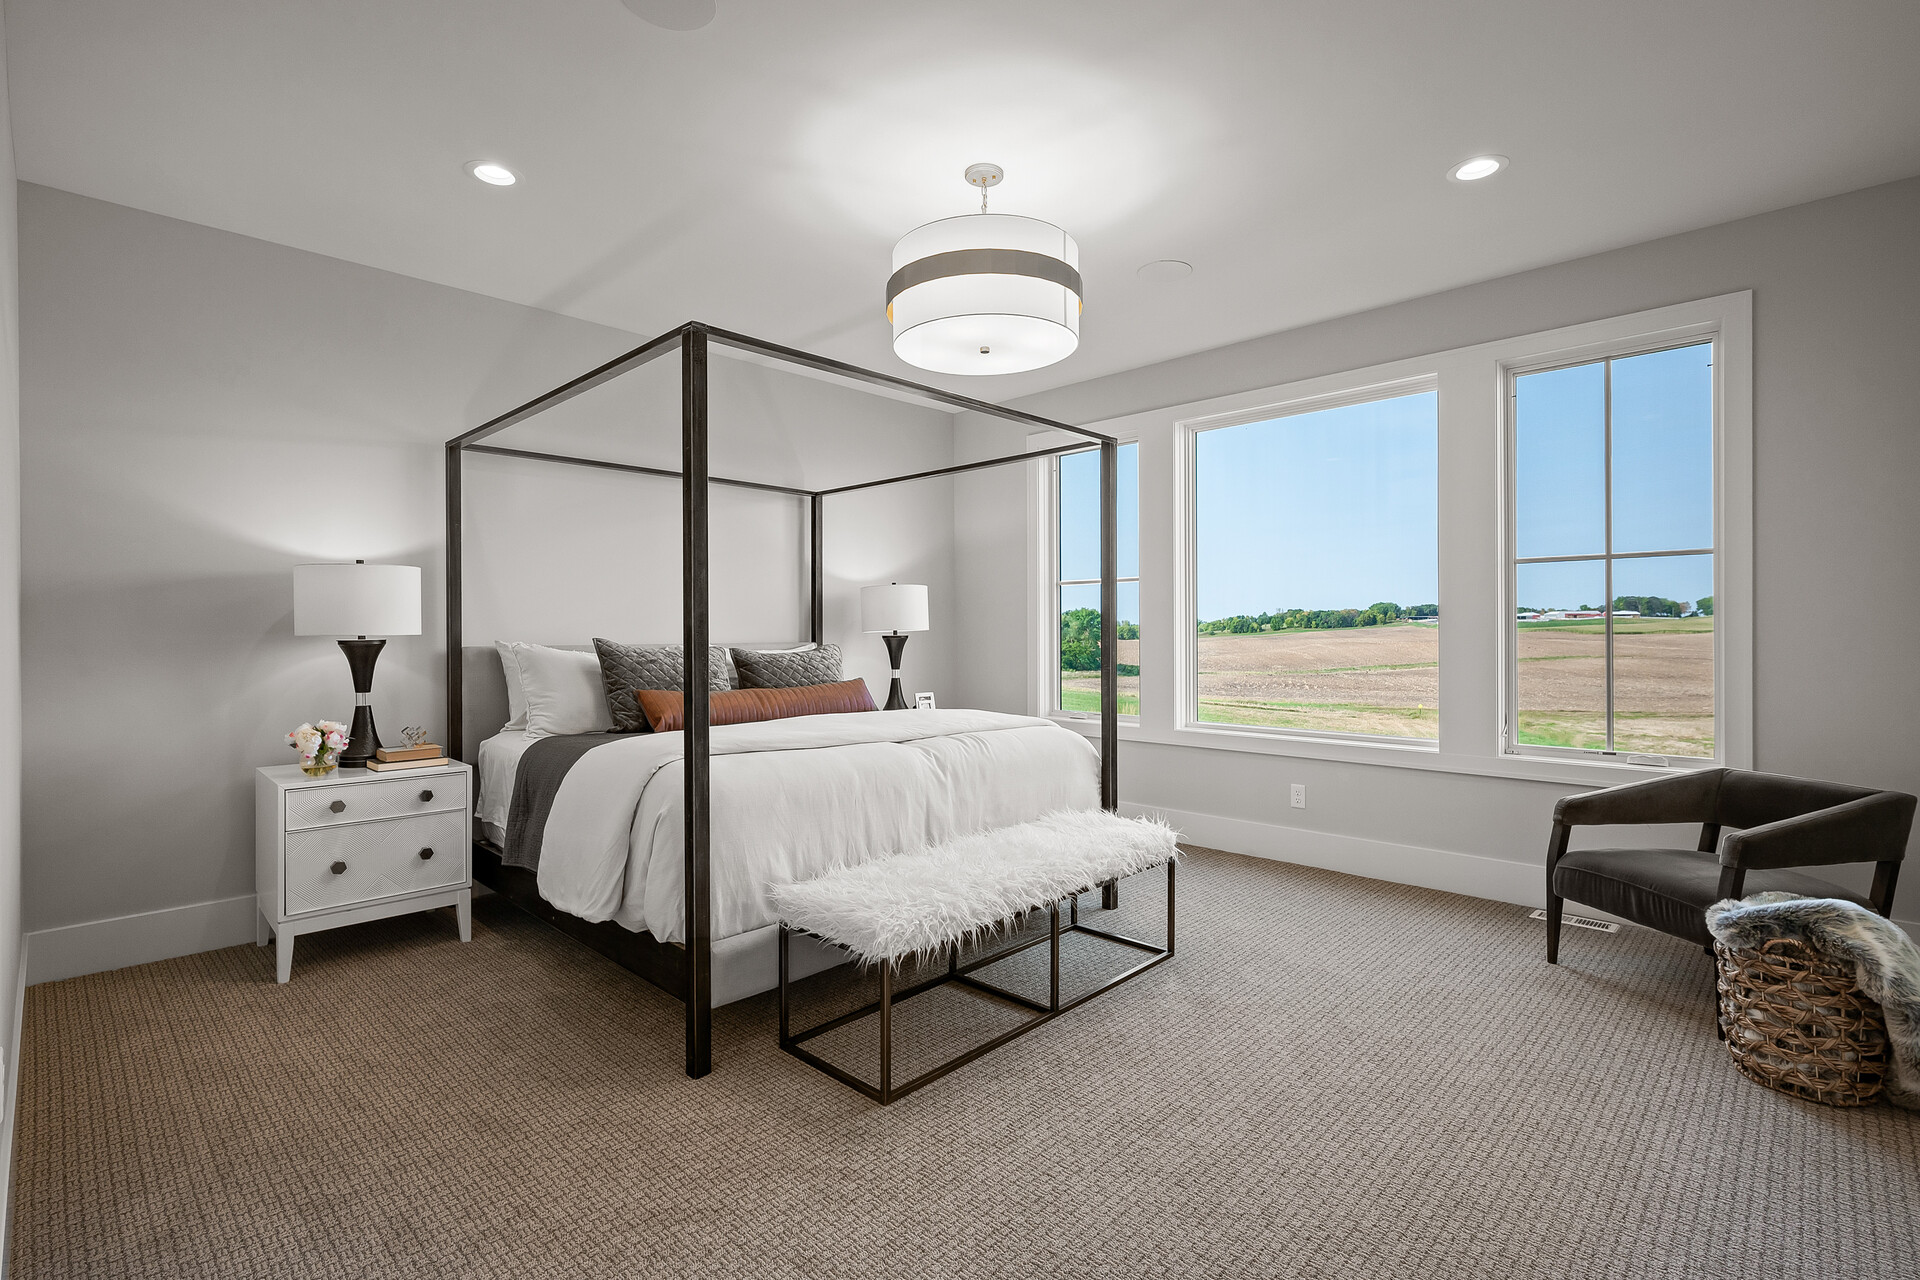 A prairie transitional custom home featuring a bedroom with a four poster bed and a large window.